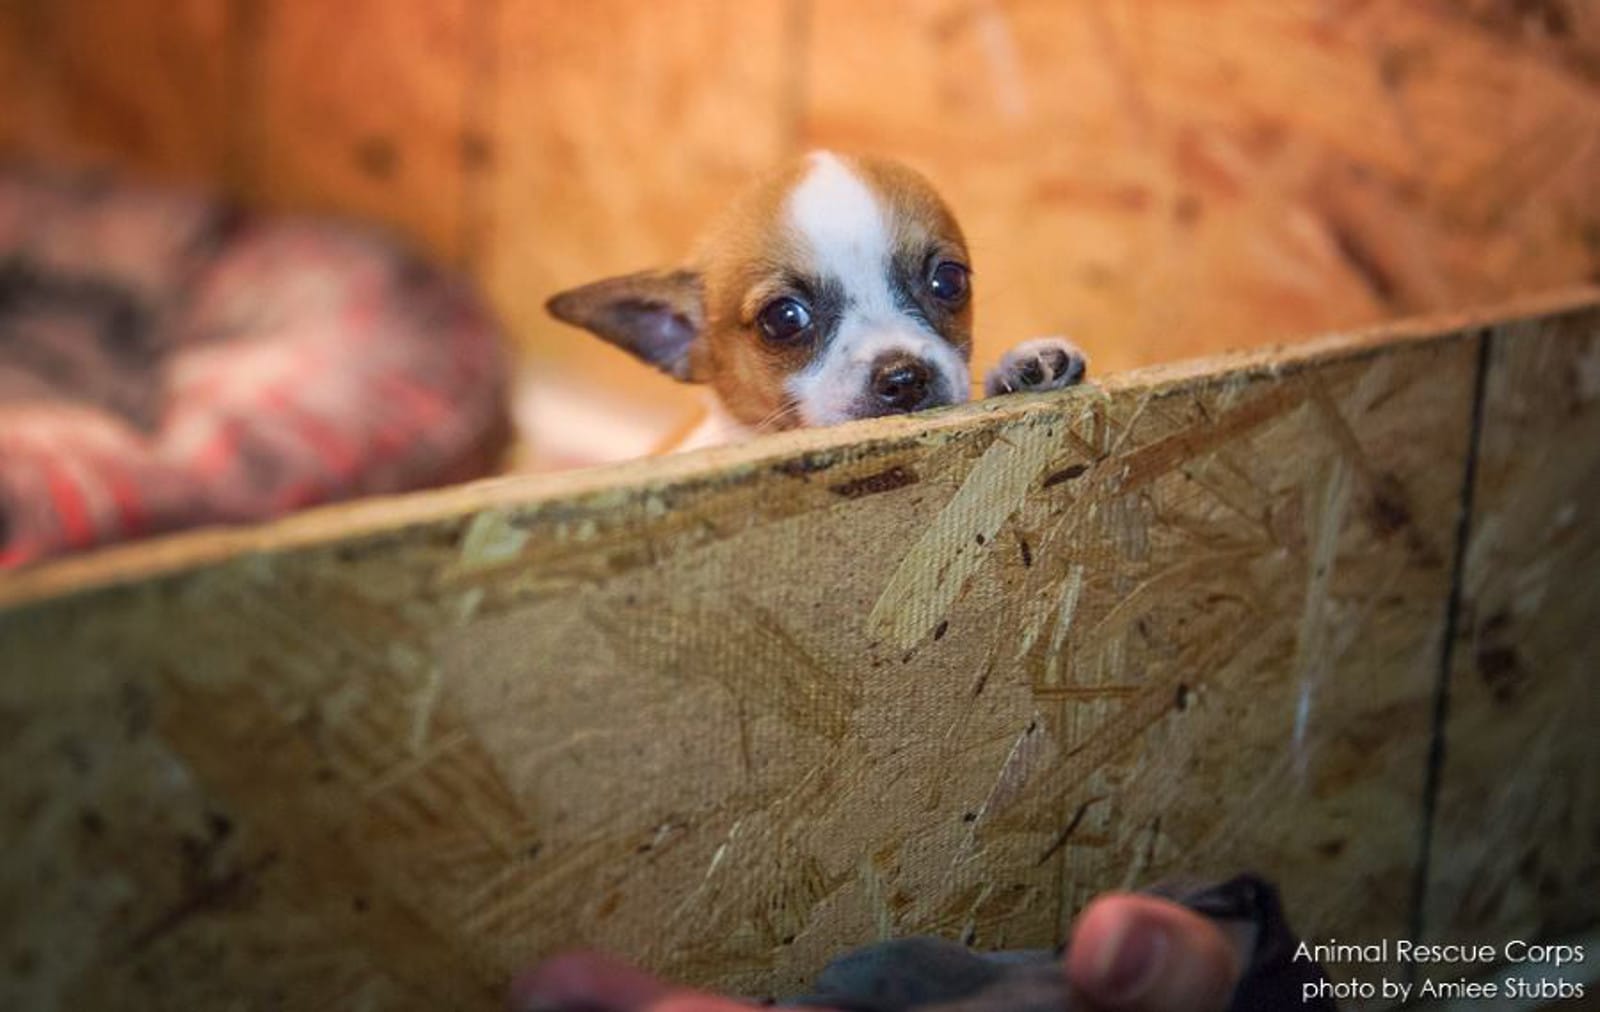 These Photos From Puppy Mills Prove Without Doubt You Should Always Adopt, NOT Shop for Pets